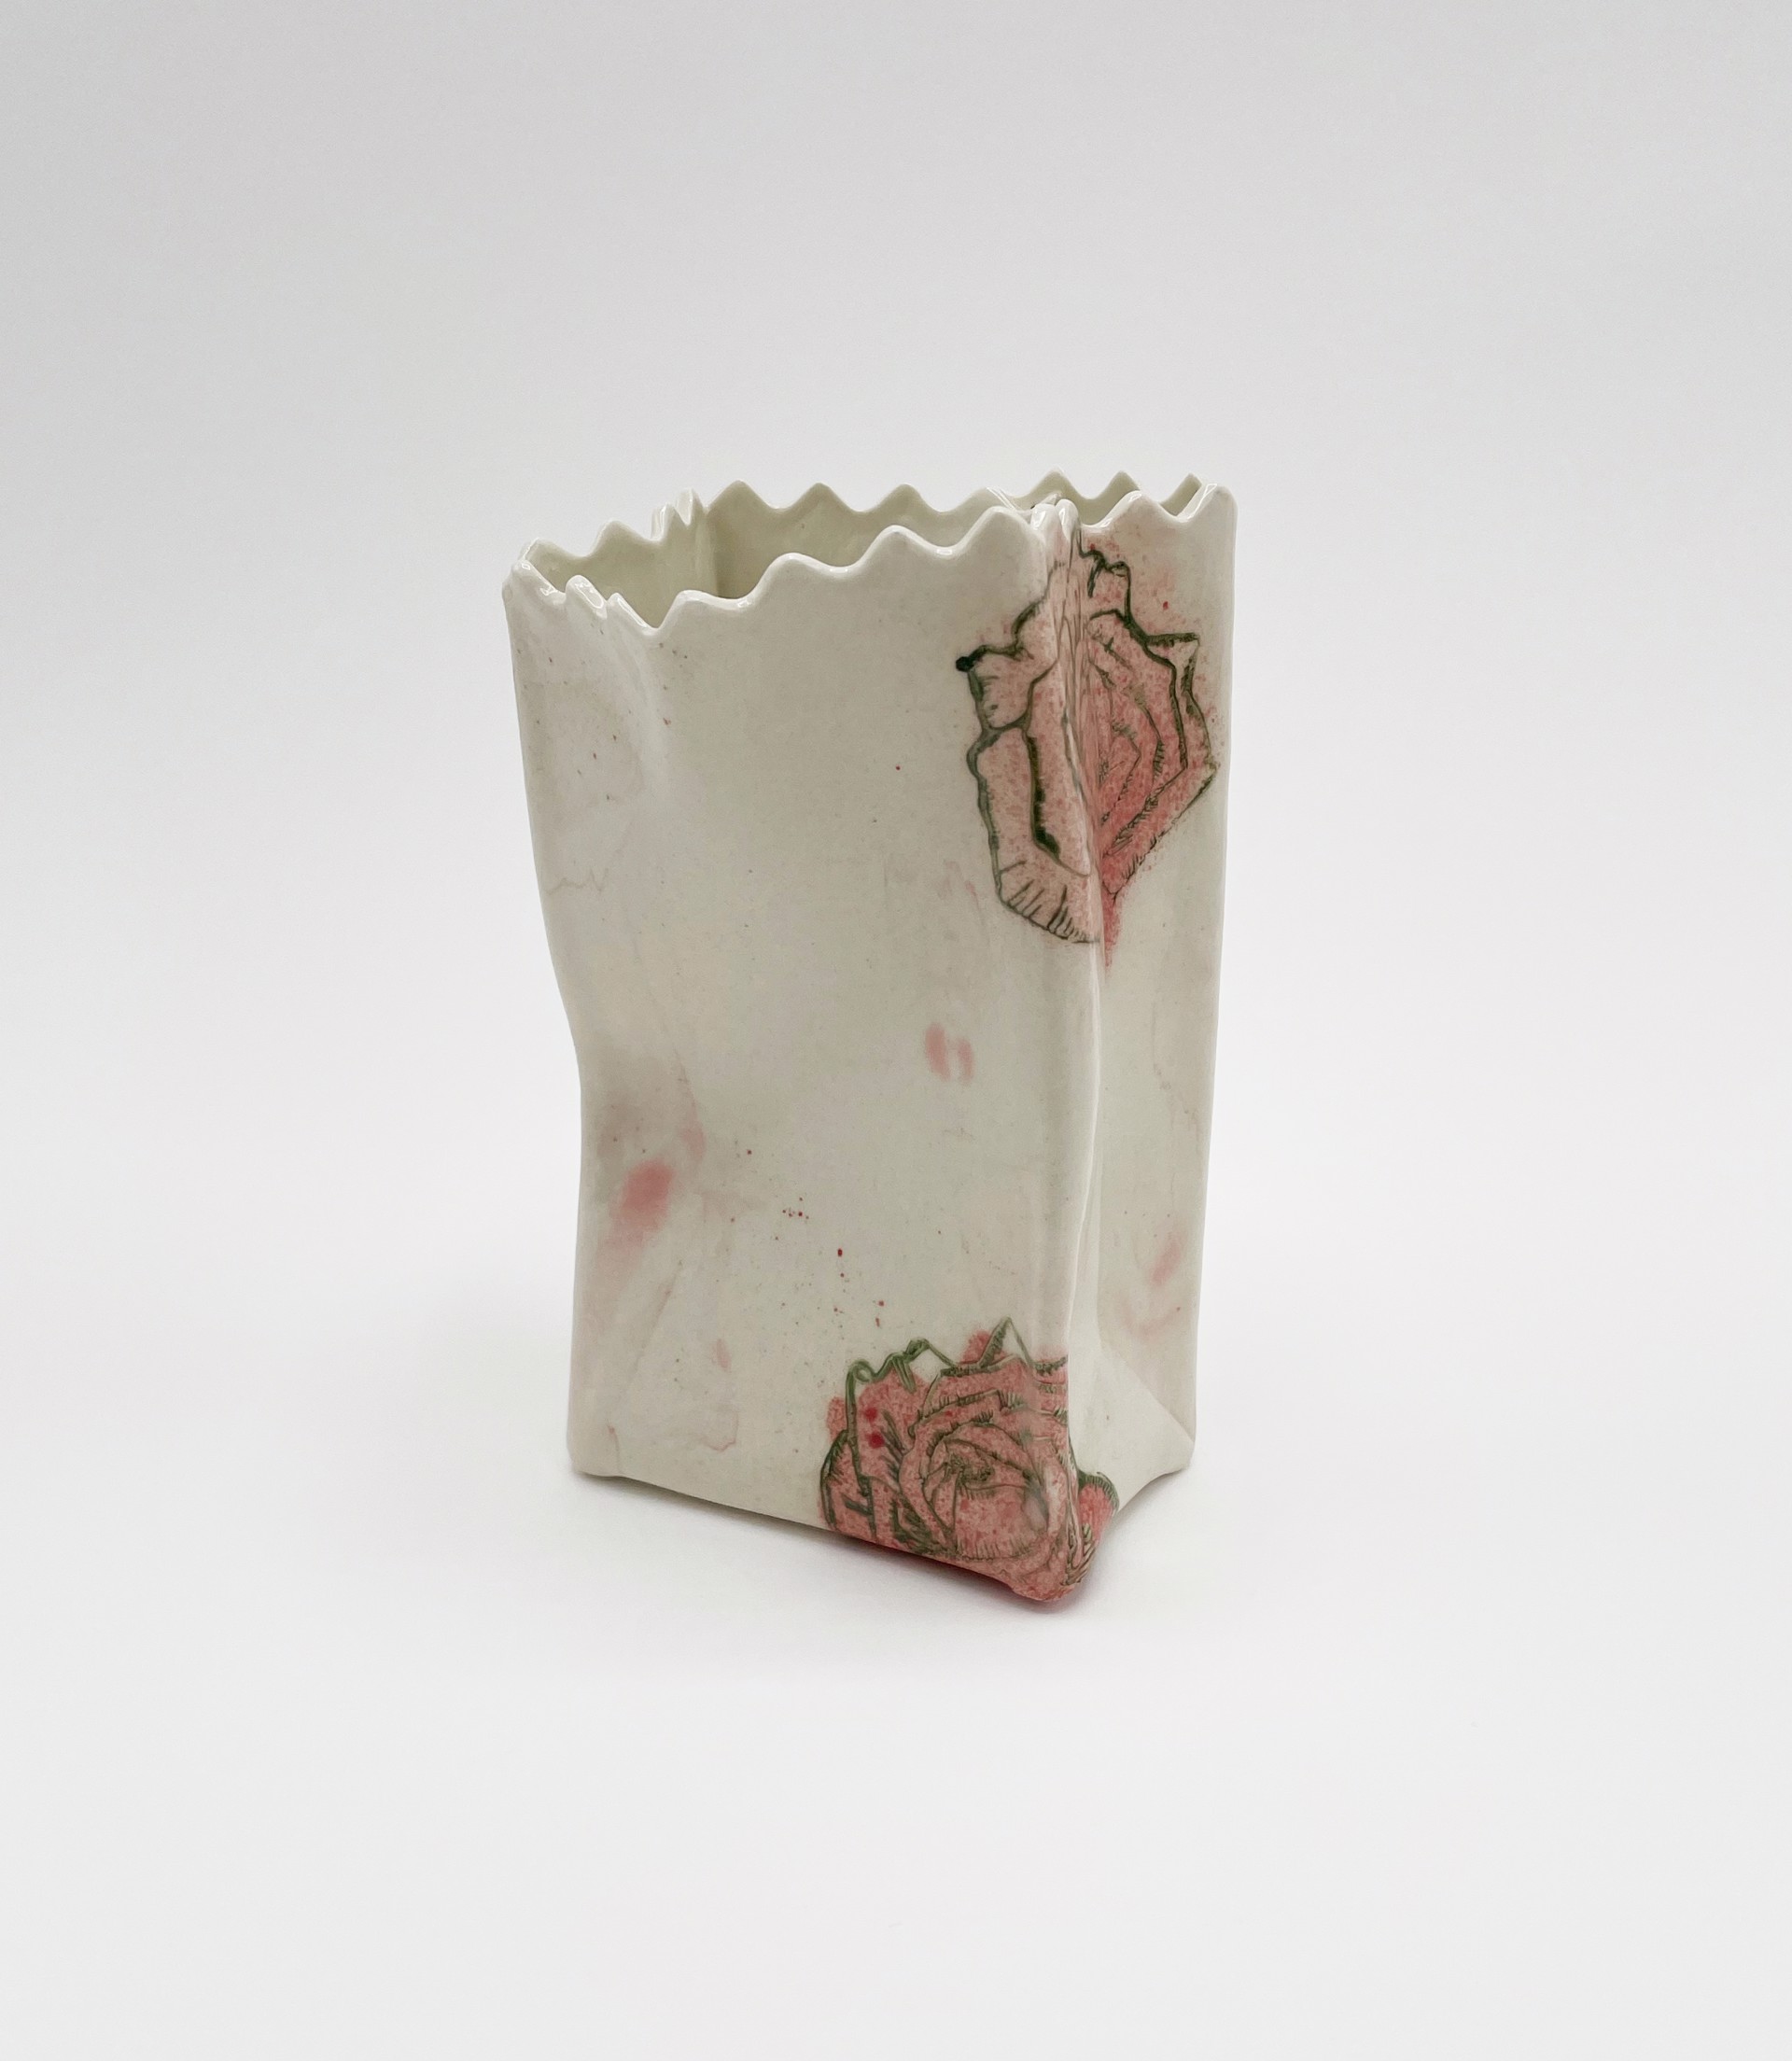 Bag with Roses by Chandra Beadleston